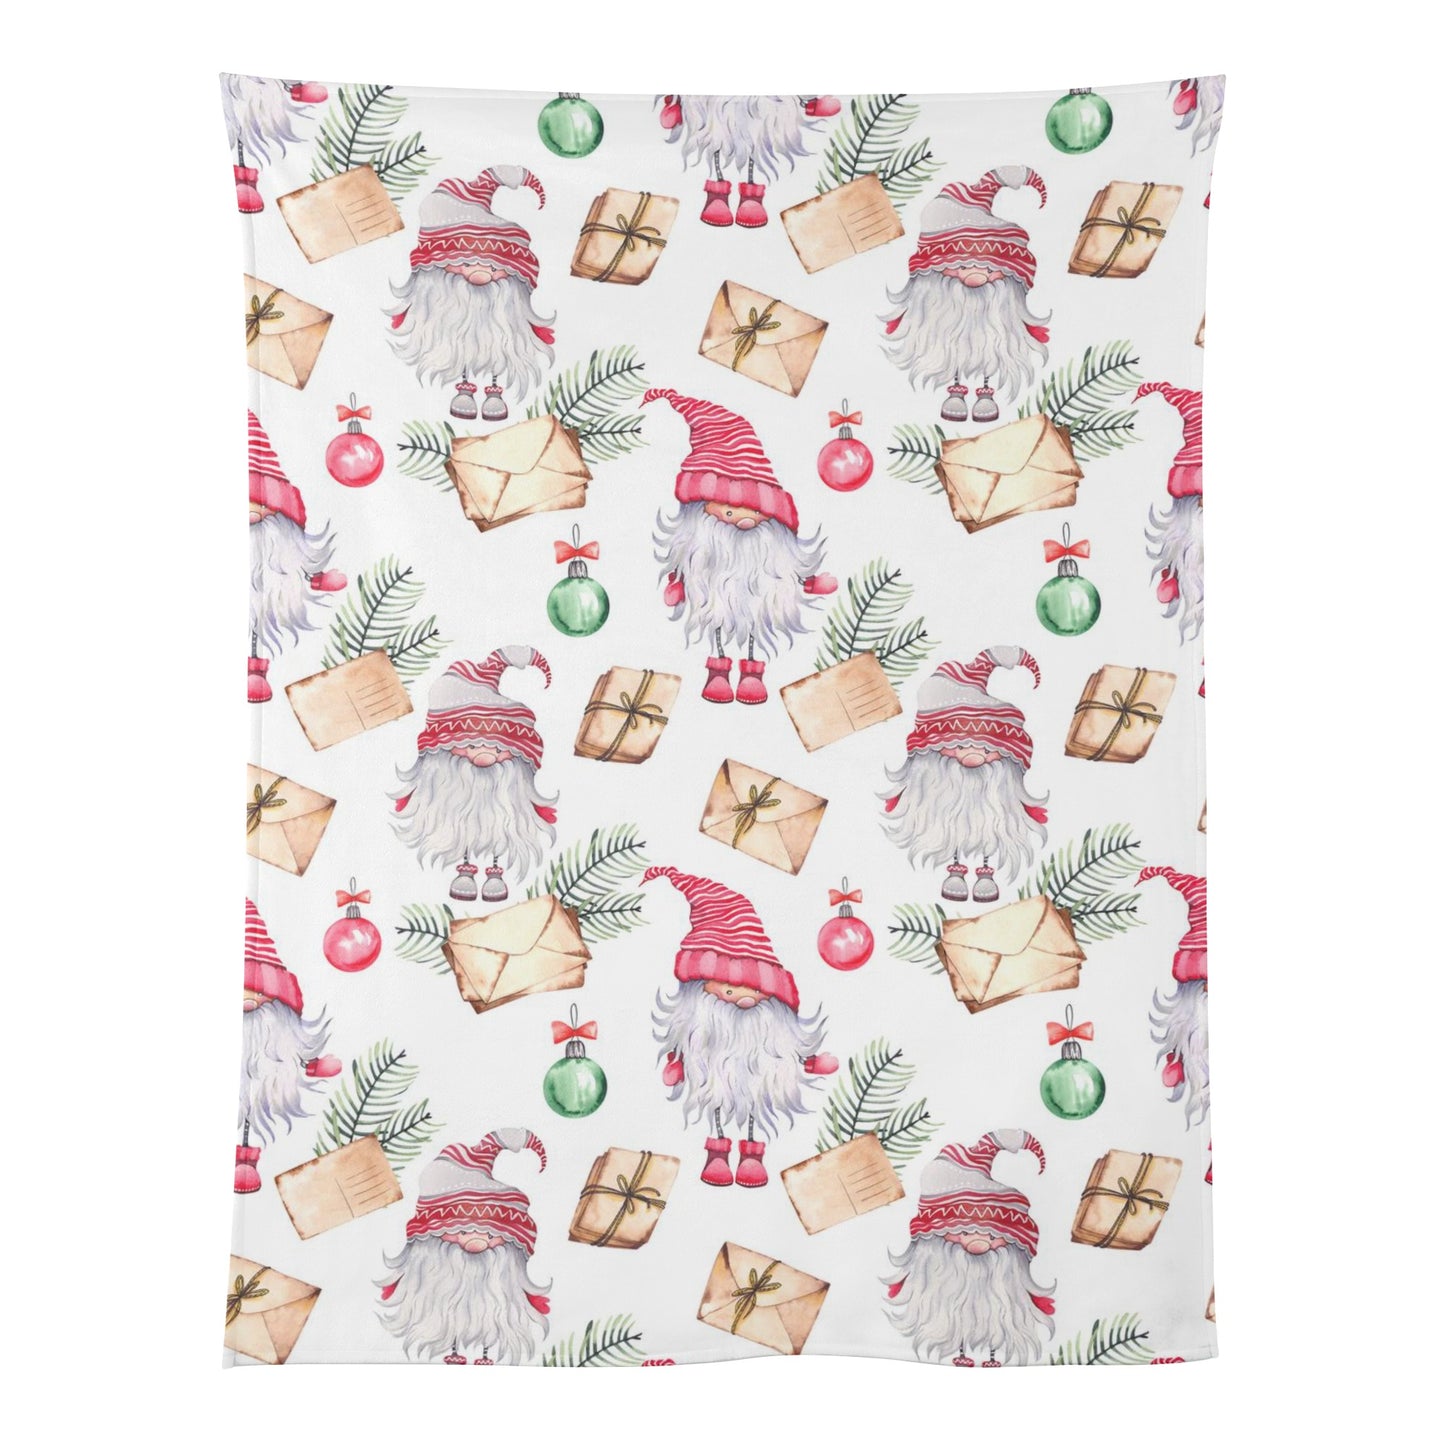 A Gnome Santa Soft Flannel Breathable Blanket for Babies and Tots